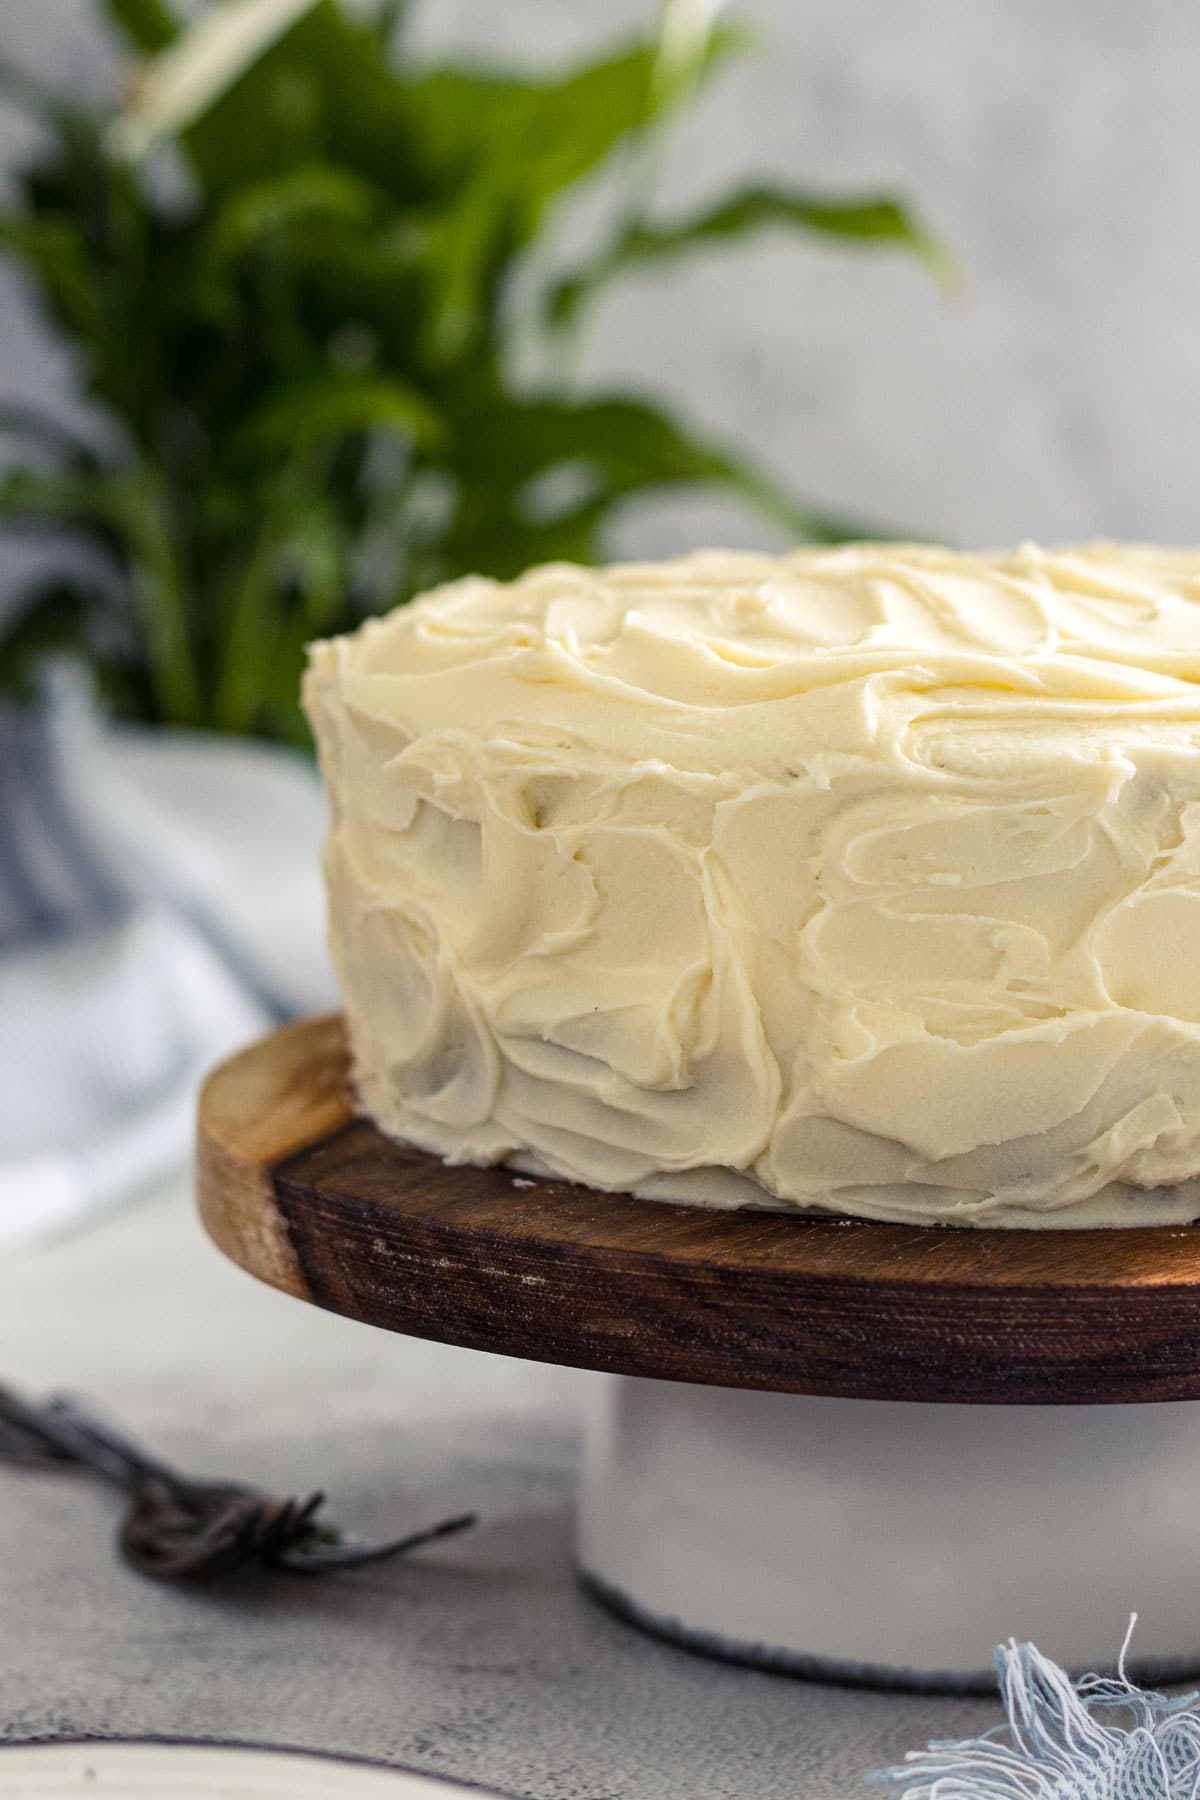 carrot cake with rustic cream cheese icing/frosting